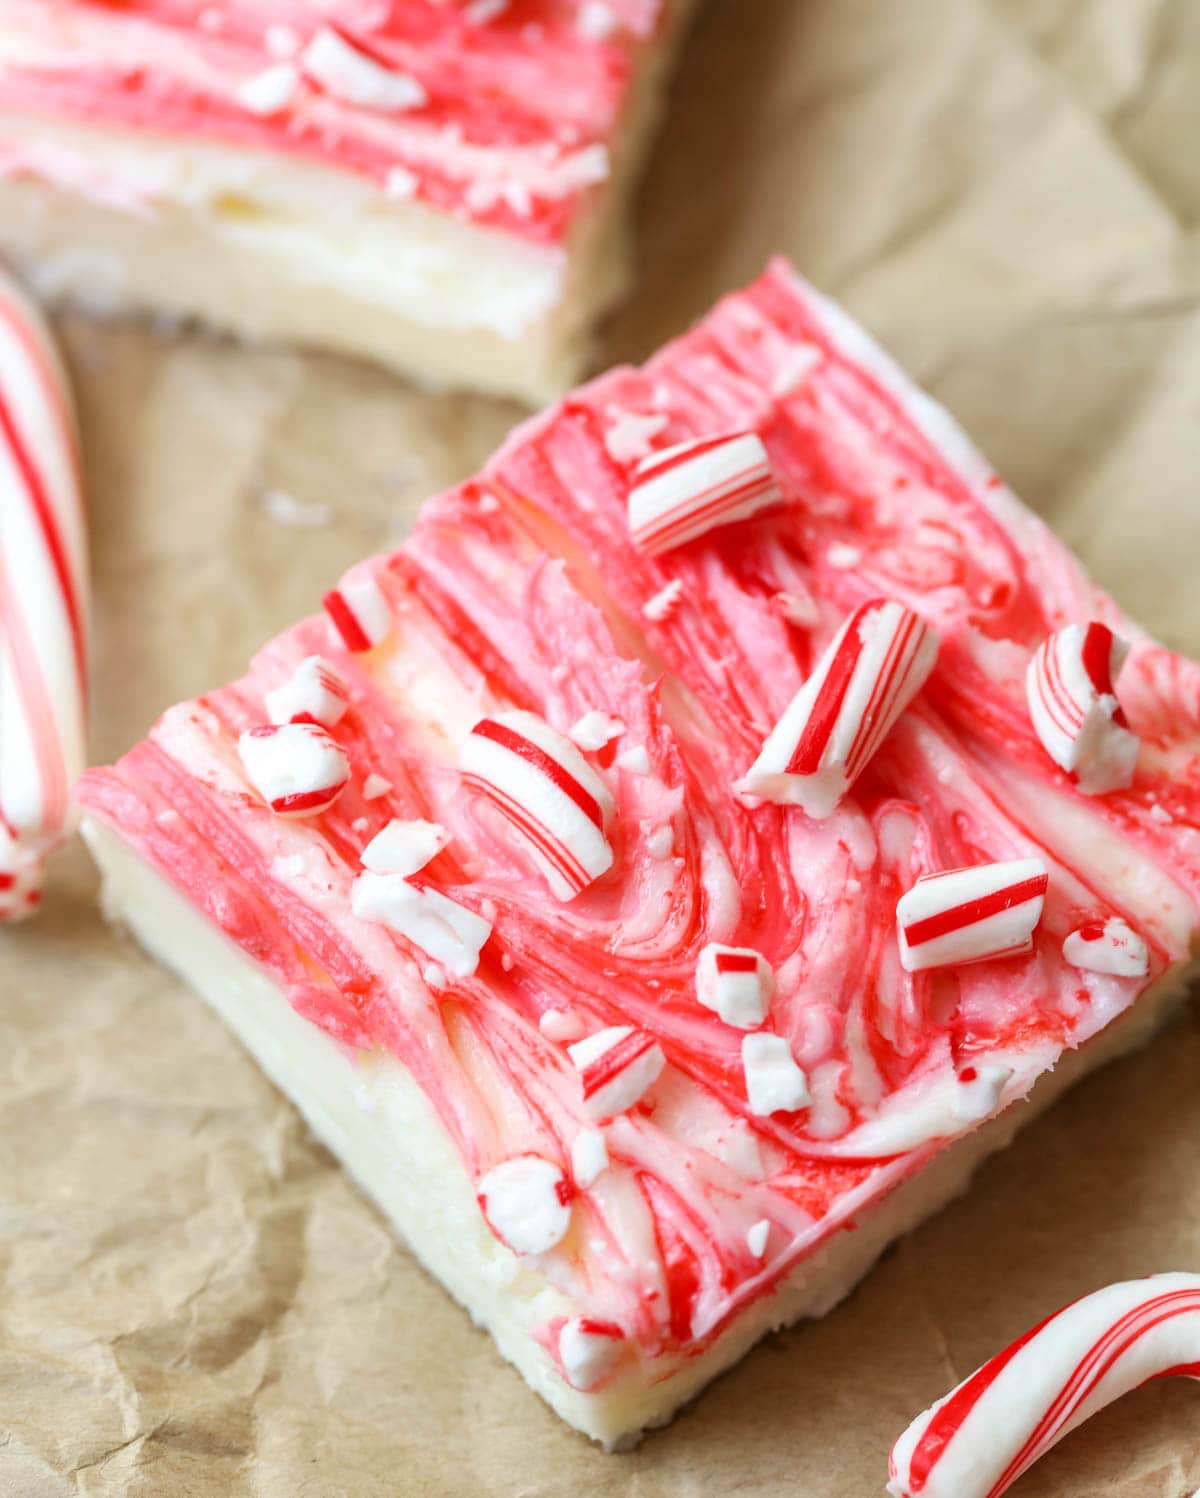 Candy cane topped peppermint cheesecake bars on brown paper.